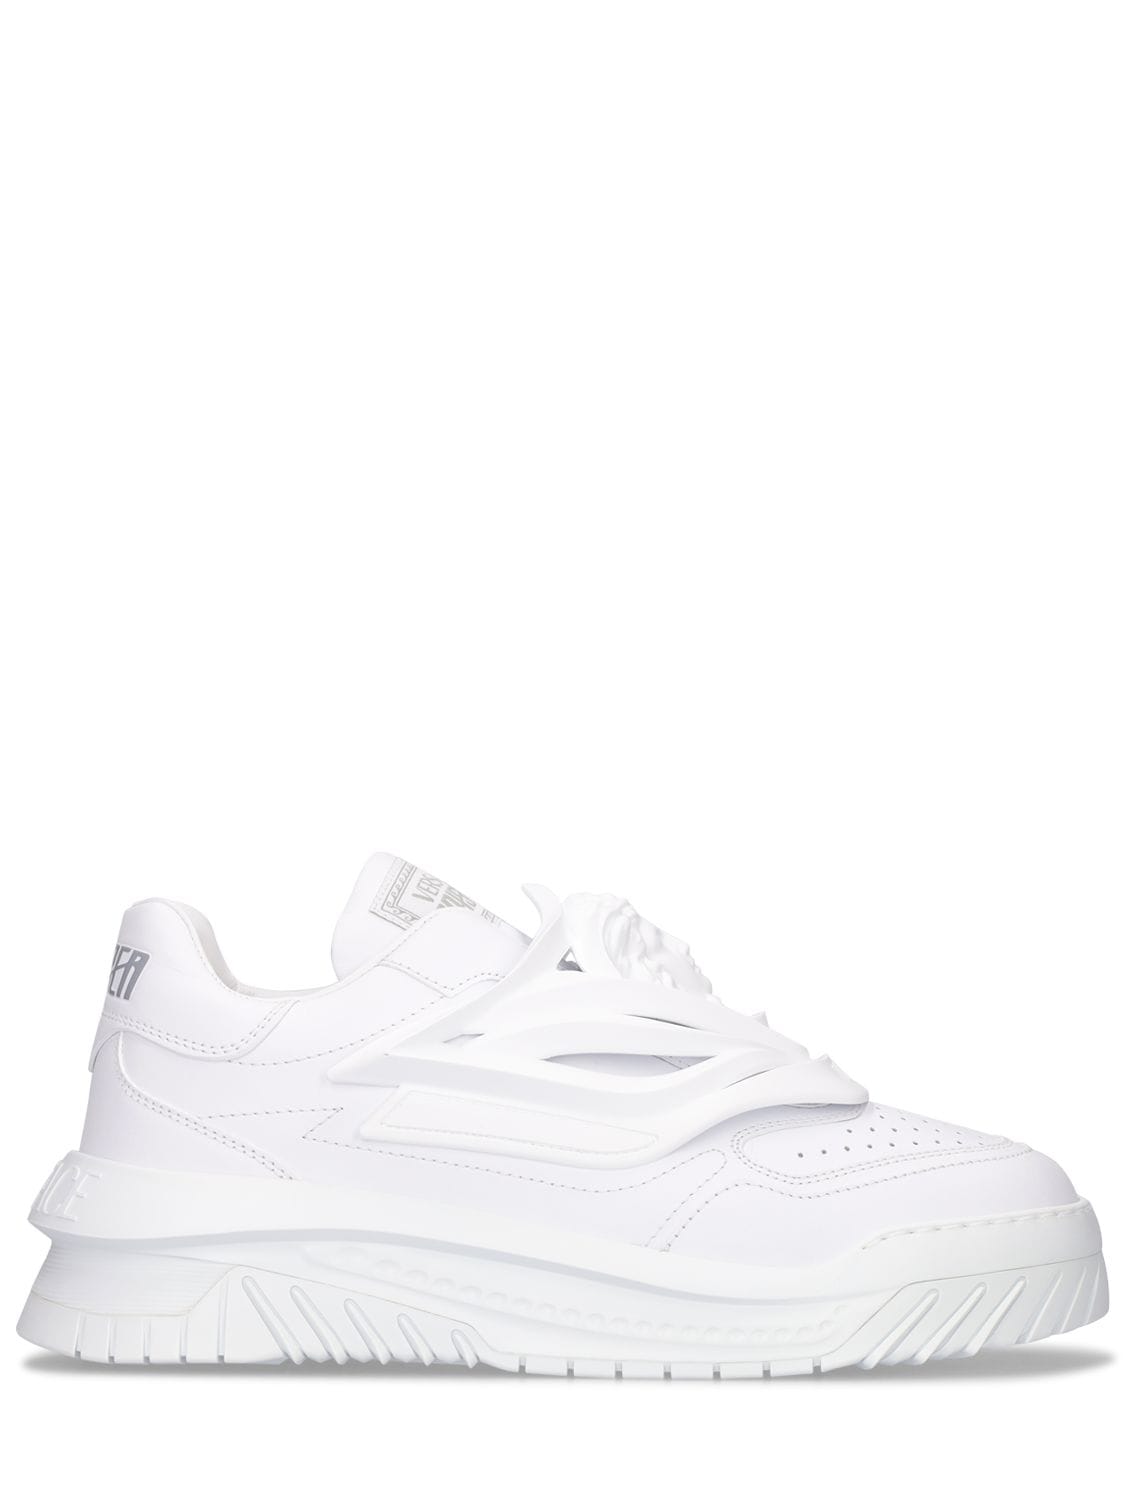 VERSACE Odissea Leather Low-top Sneakers